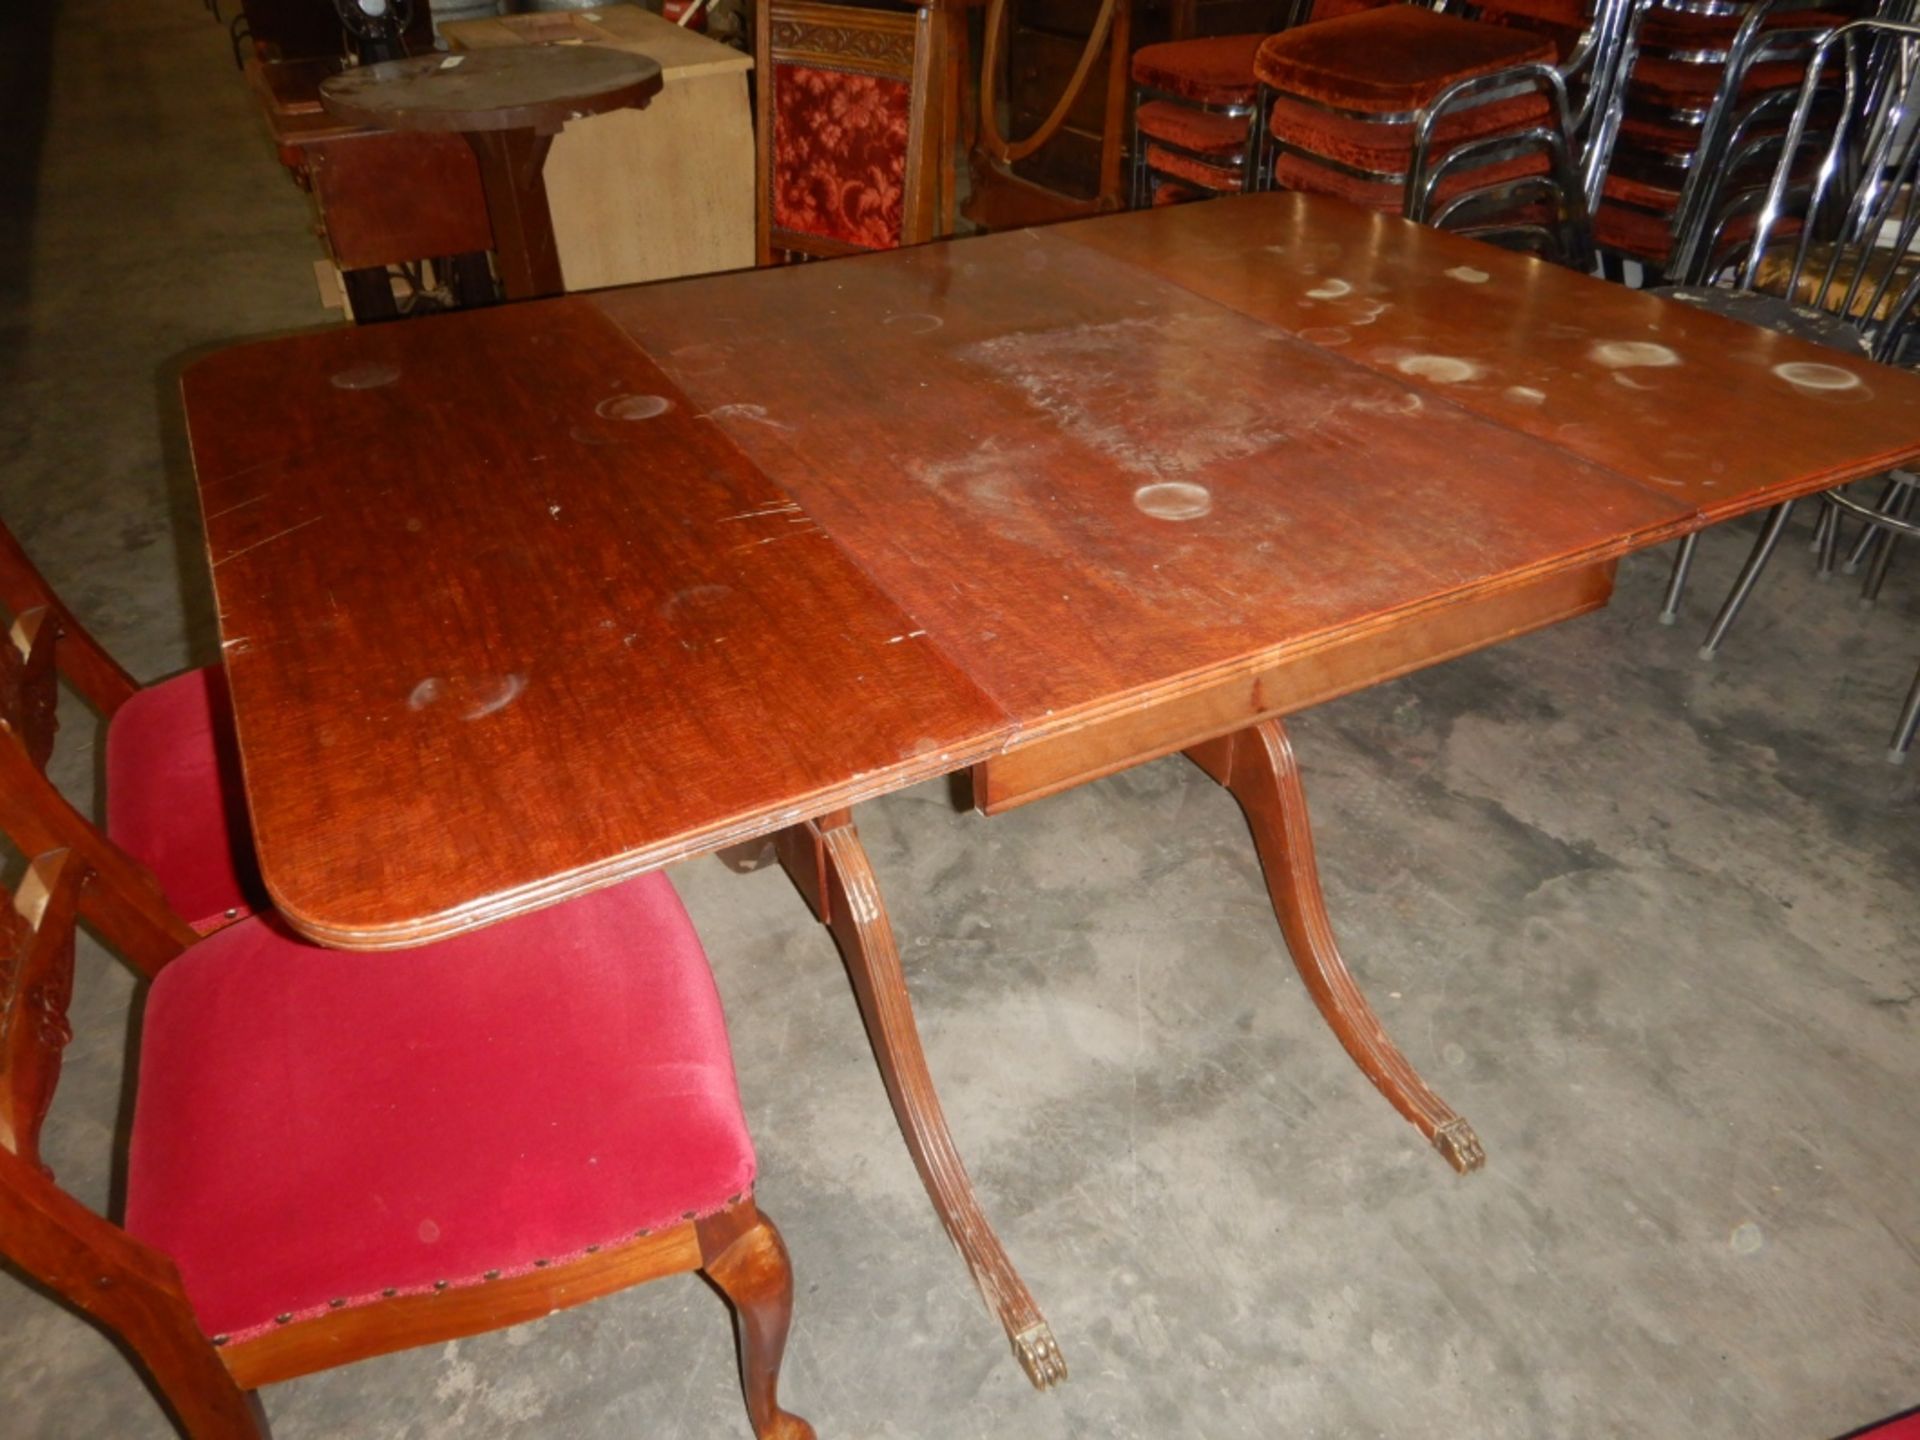 ANTIQUE DUNCAN PHYFE STYLE DROP LEAF TABLE AND CHAIRS (6) - Image 16 of 16